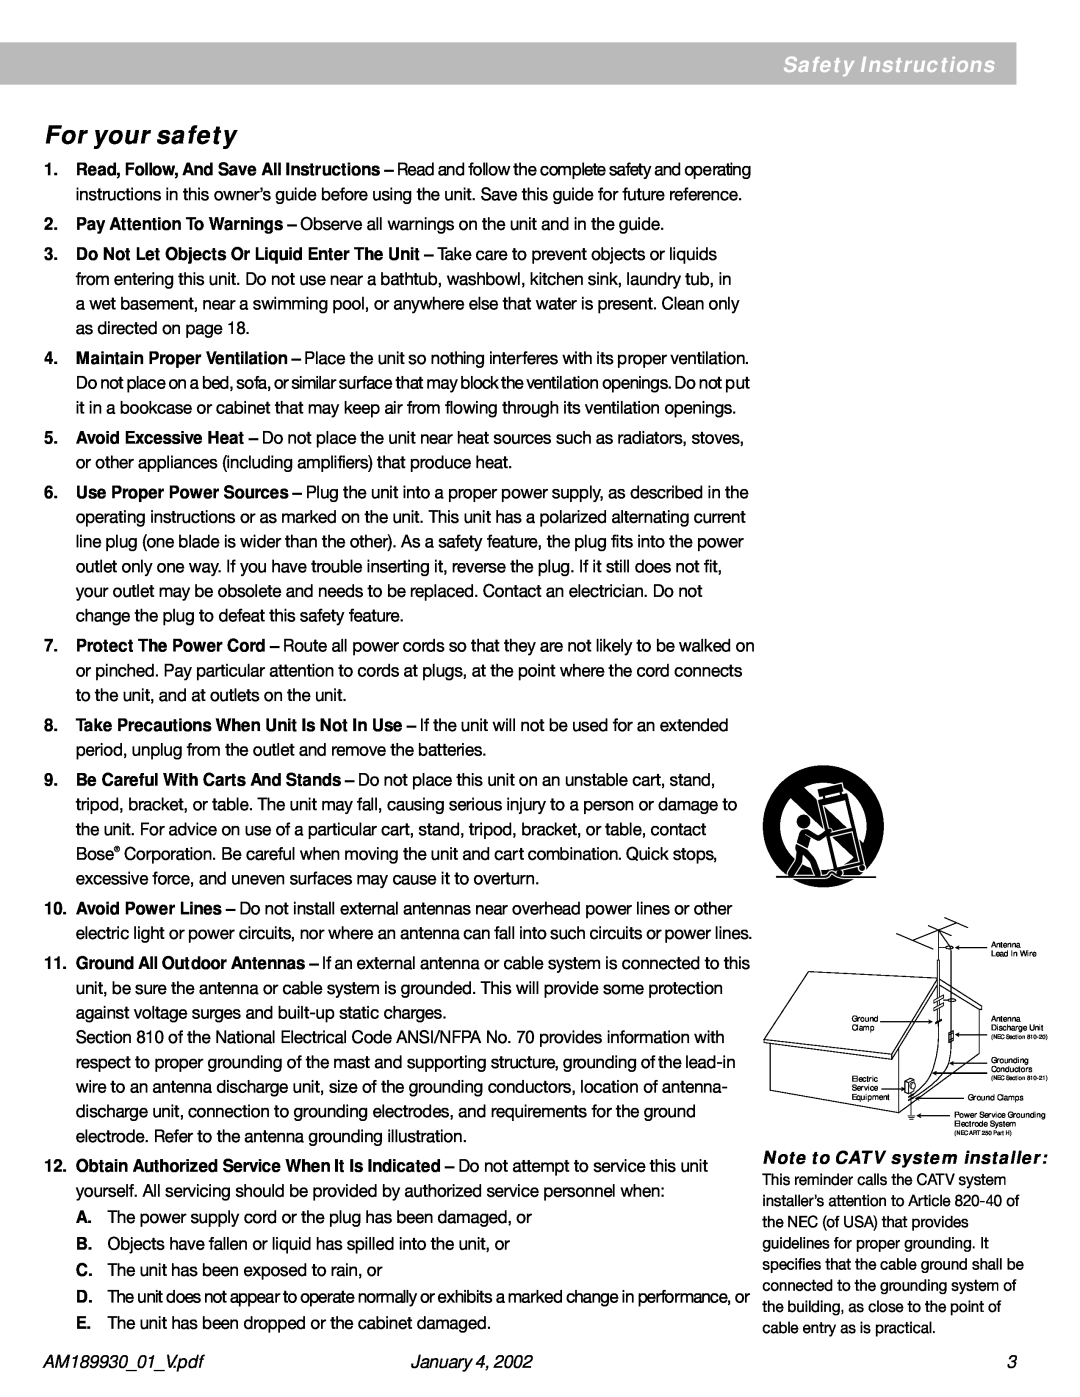 Bose AM189930 manual For your safety, Note to CATV system installer, Safety Instructions, January 